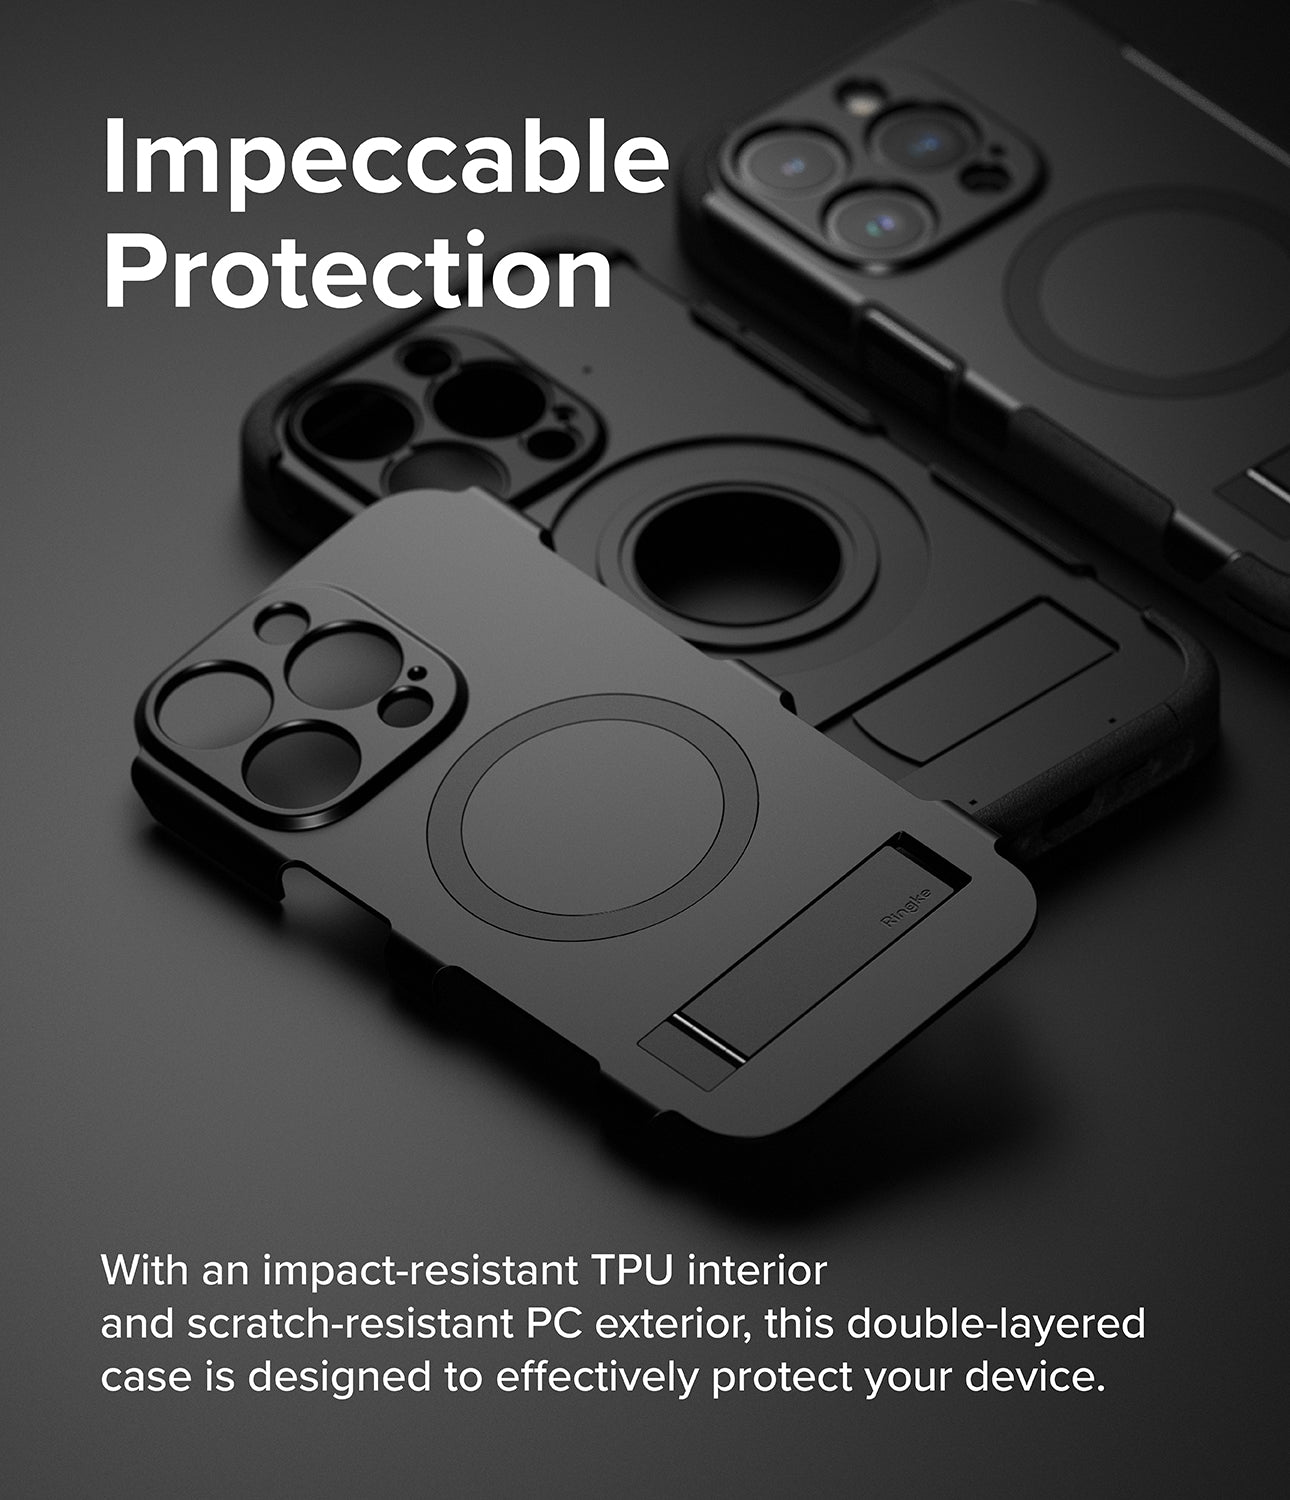 iPhone 15 Pro Max Case | Alles - Impeccable Protection. With and impact-resistant TPU interior and scratch-resistant PC exterior, this double-layered case is designed to effectively protect your device.